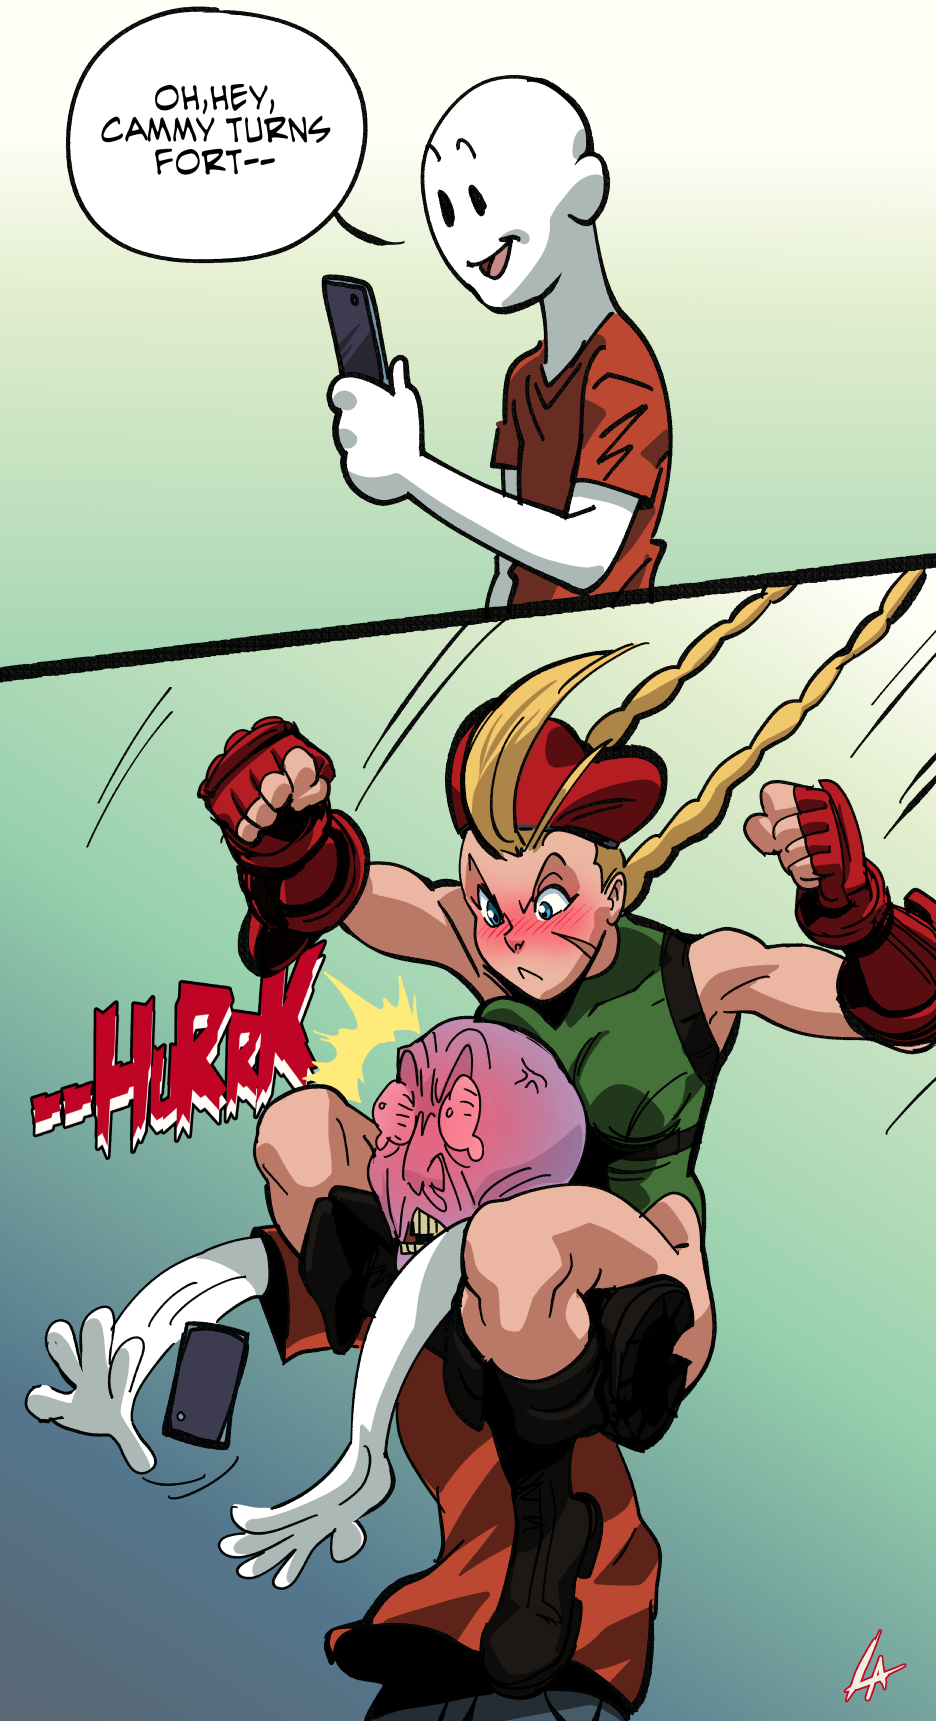 liefeldianabomination: 44 years young! Happy B-day Cammy!  I heard 20~ &lt; |D’‘‘‘